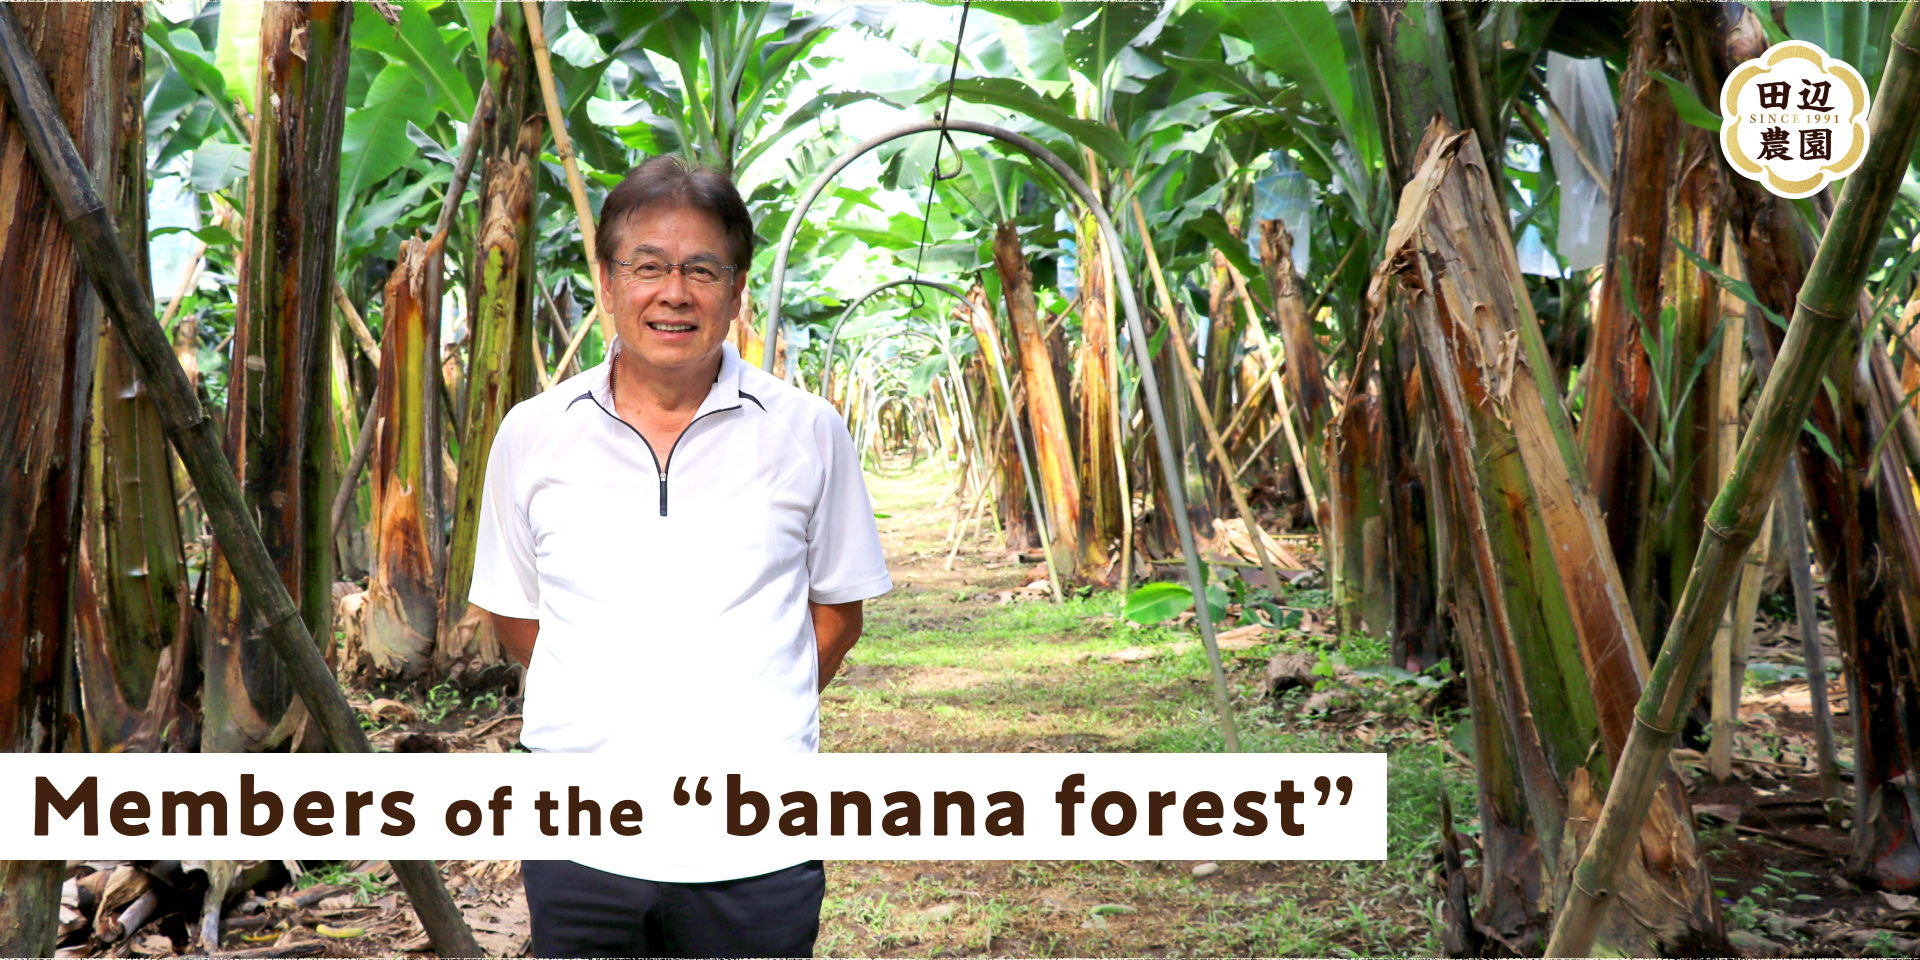 Members of the "banana forest"